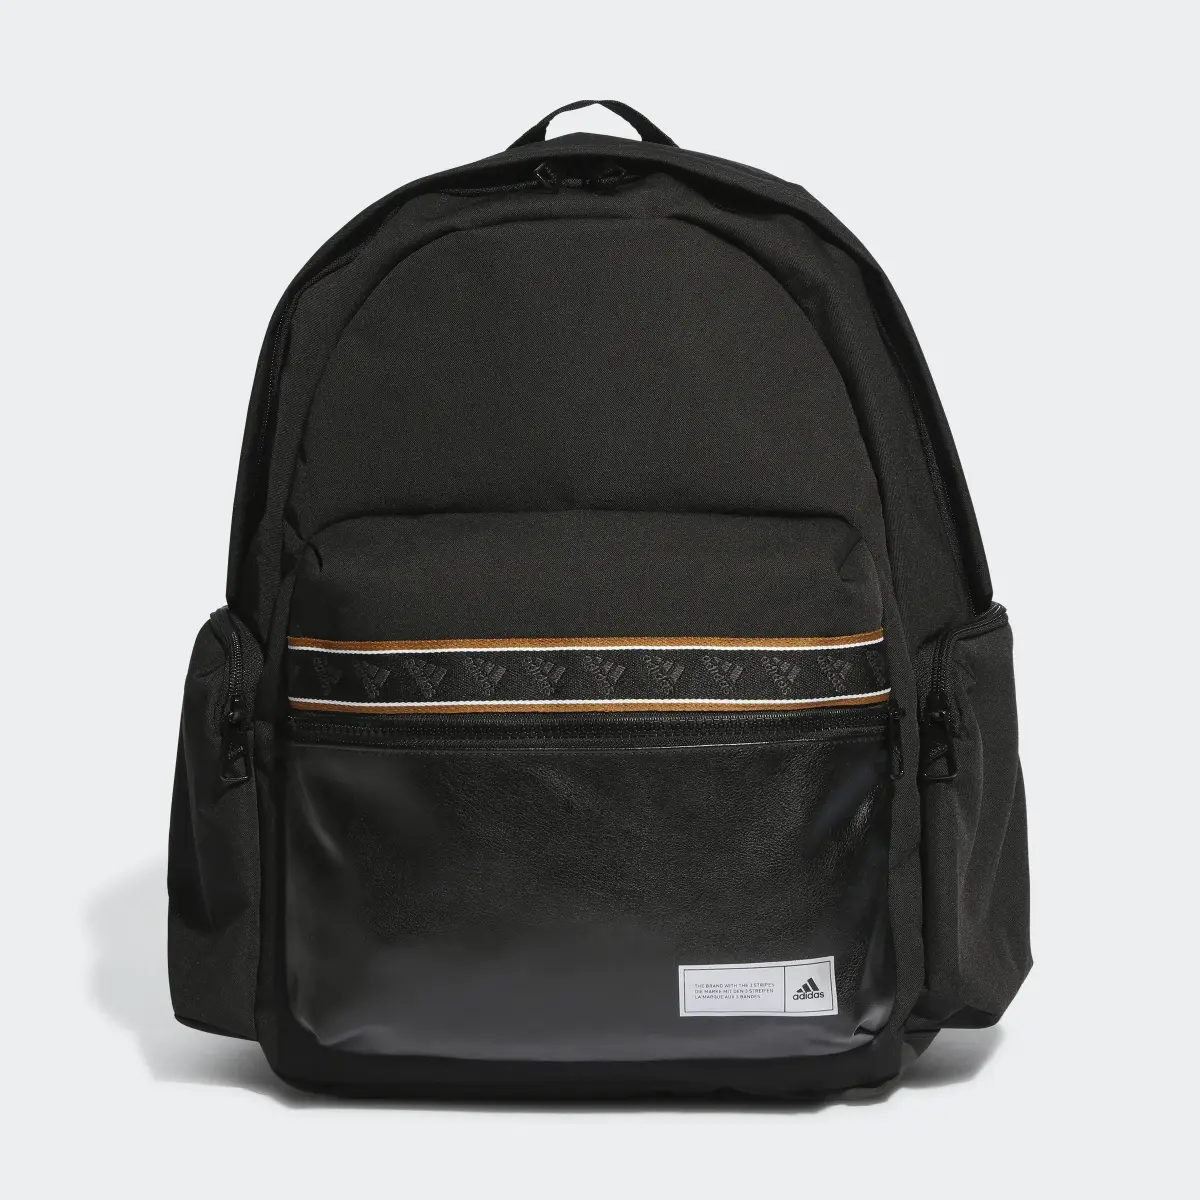 Adidas Back to School Classic Backpack. 2